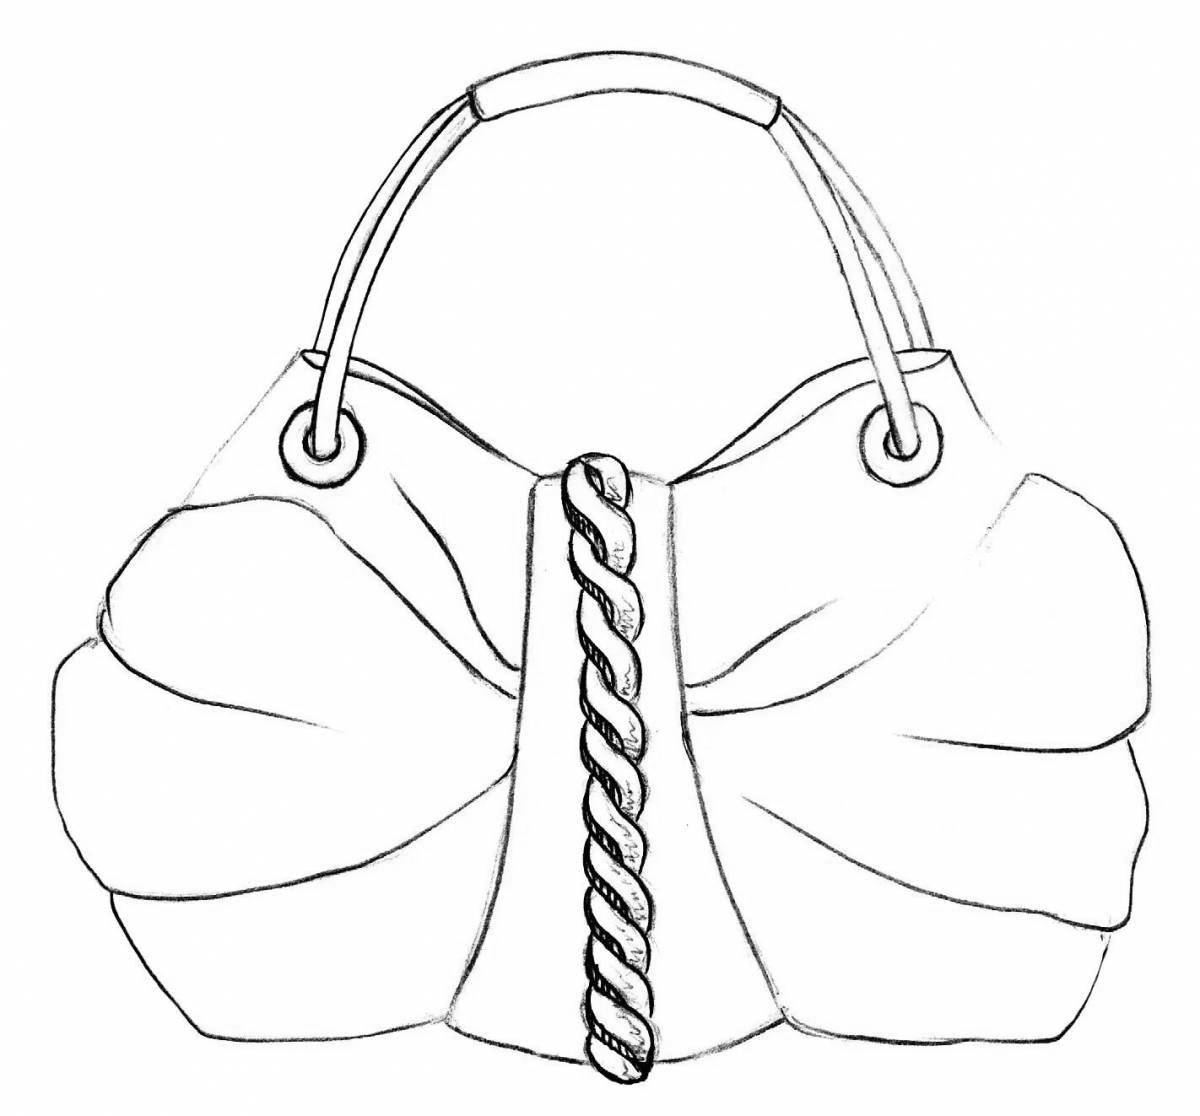 Playful beach bag coloring page